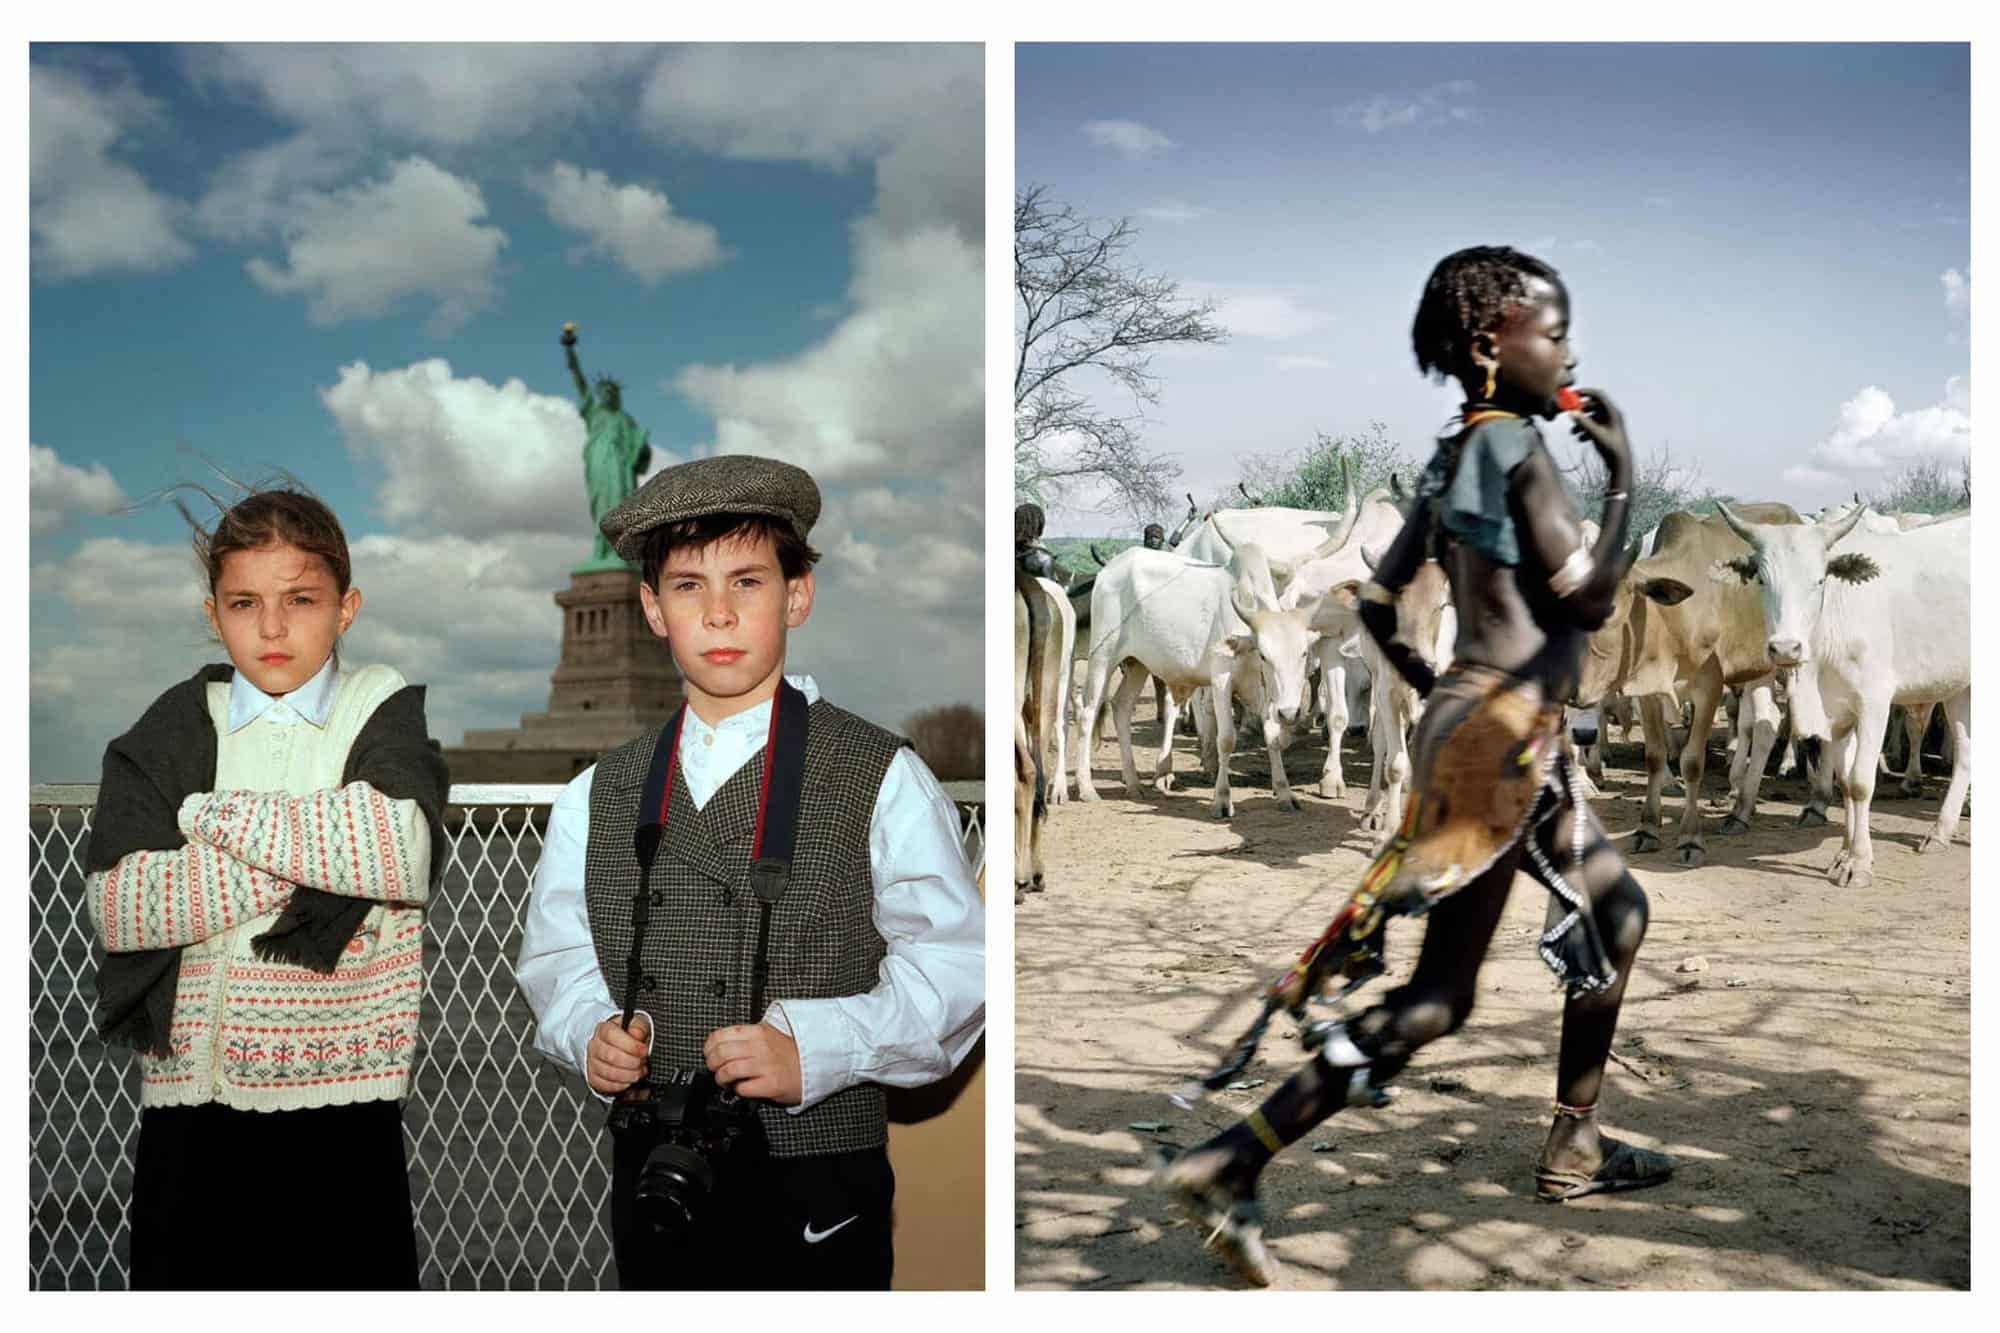 Left: Two immigrant kids in a ferry boat, on their way to visit the Statue of Liberty in New York City. Right: A hamer girl walks in front of the bulls dressed with the traditional calf-skin skirt in Ethiopia.